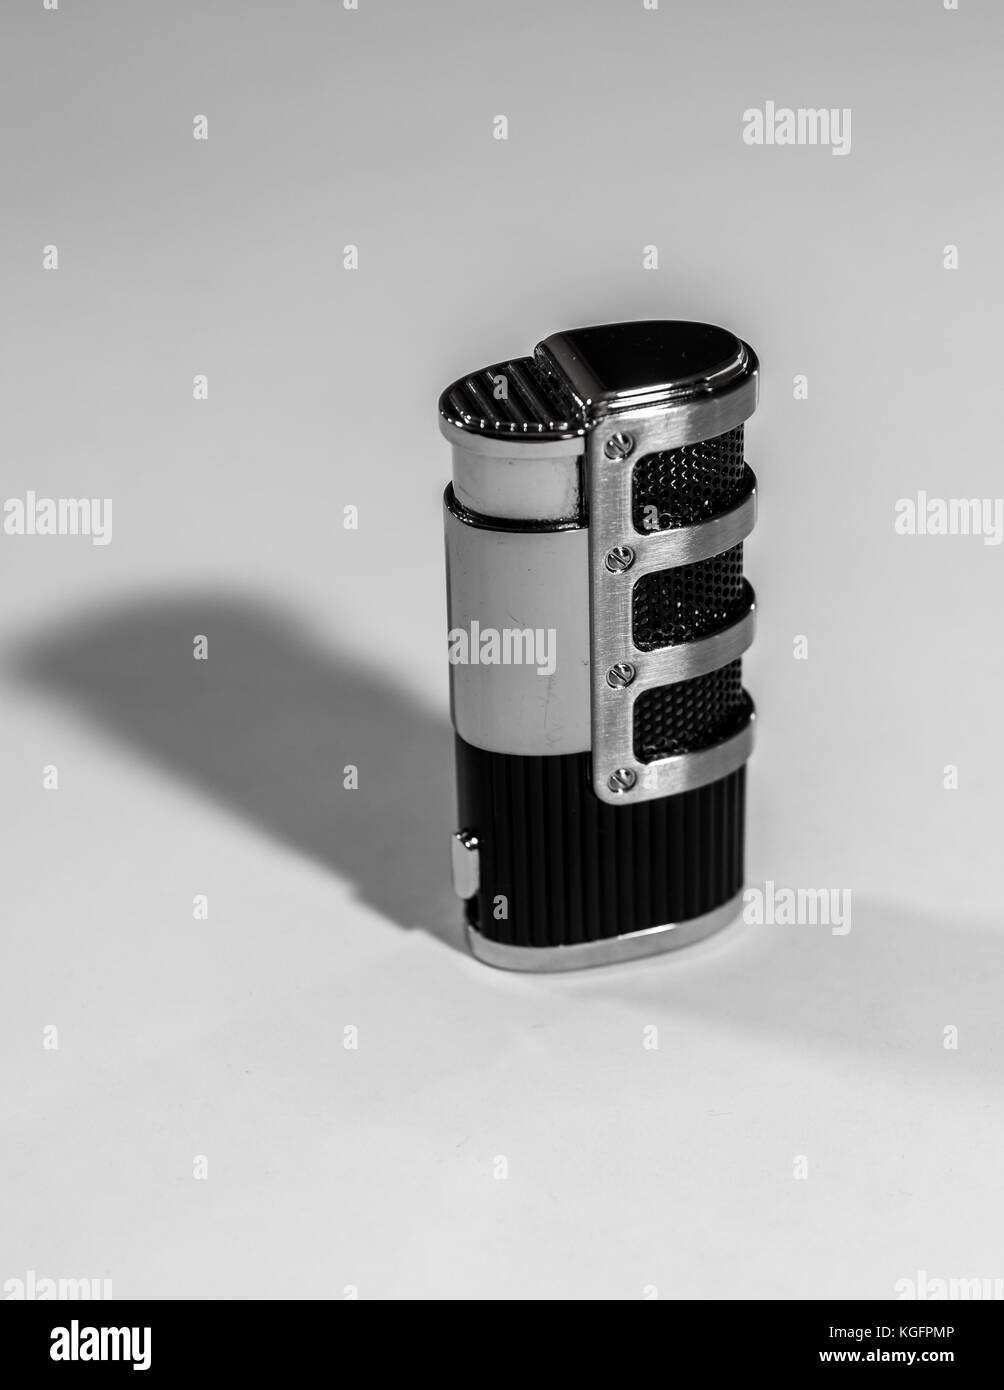 Cigar Lighter and Cigars Stock Photo